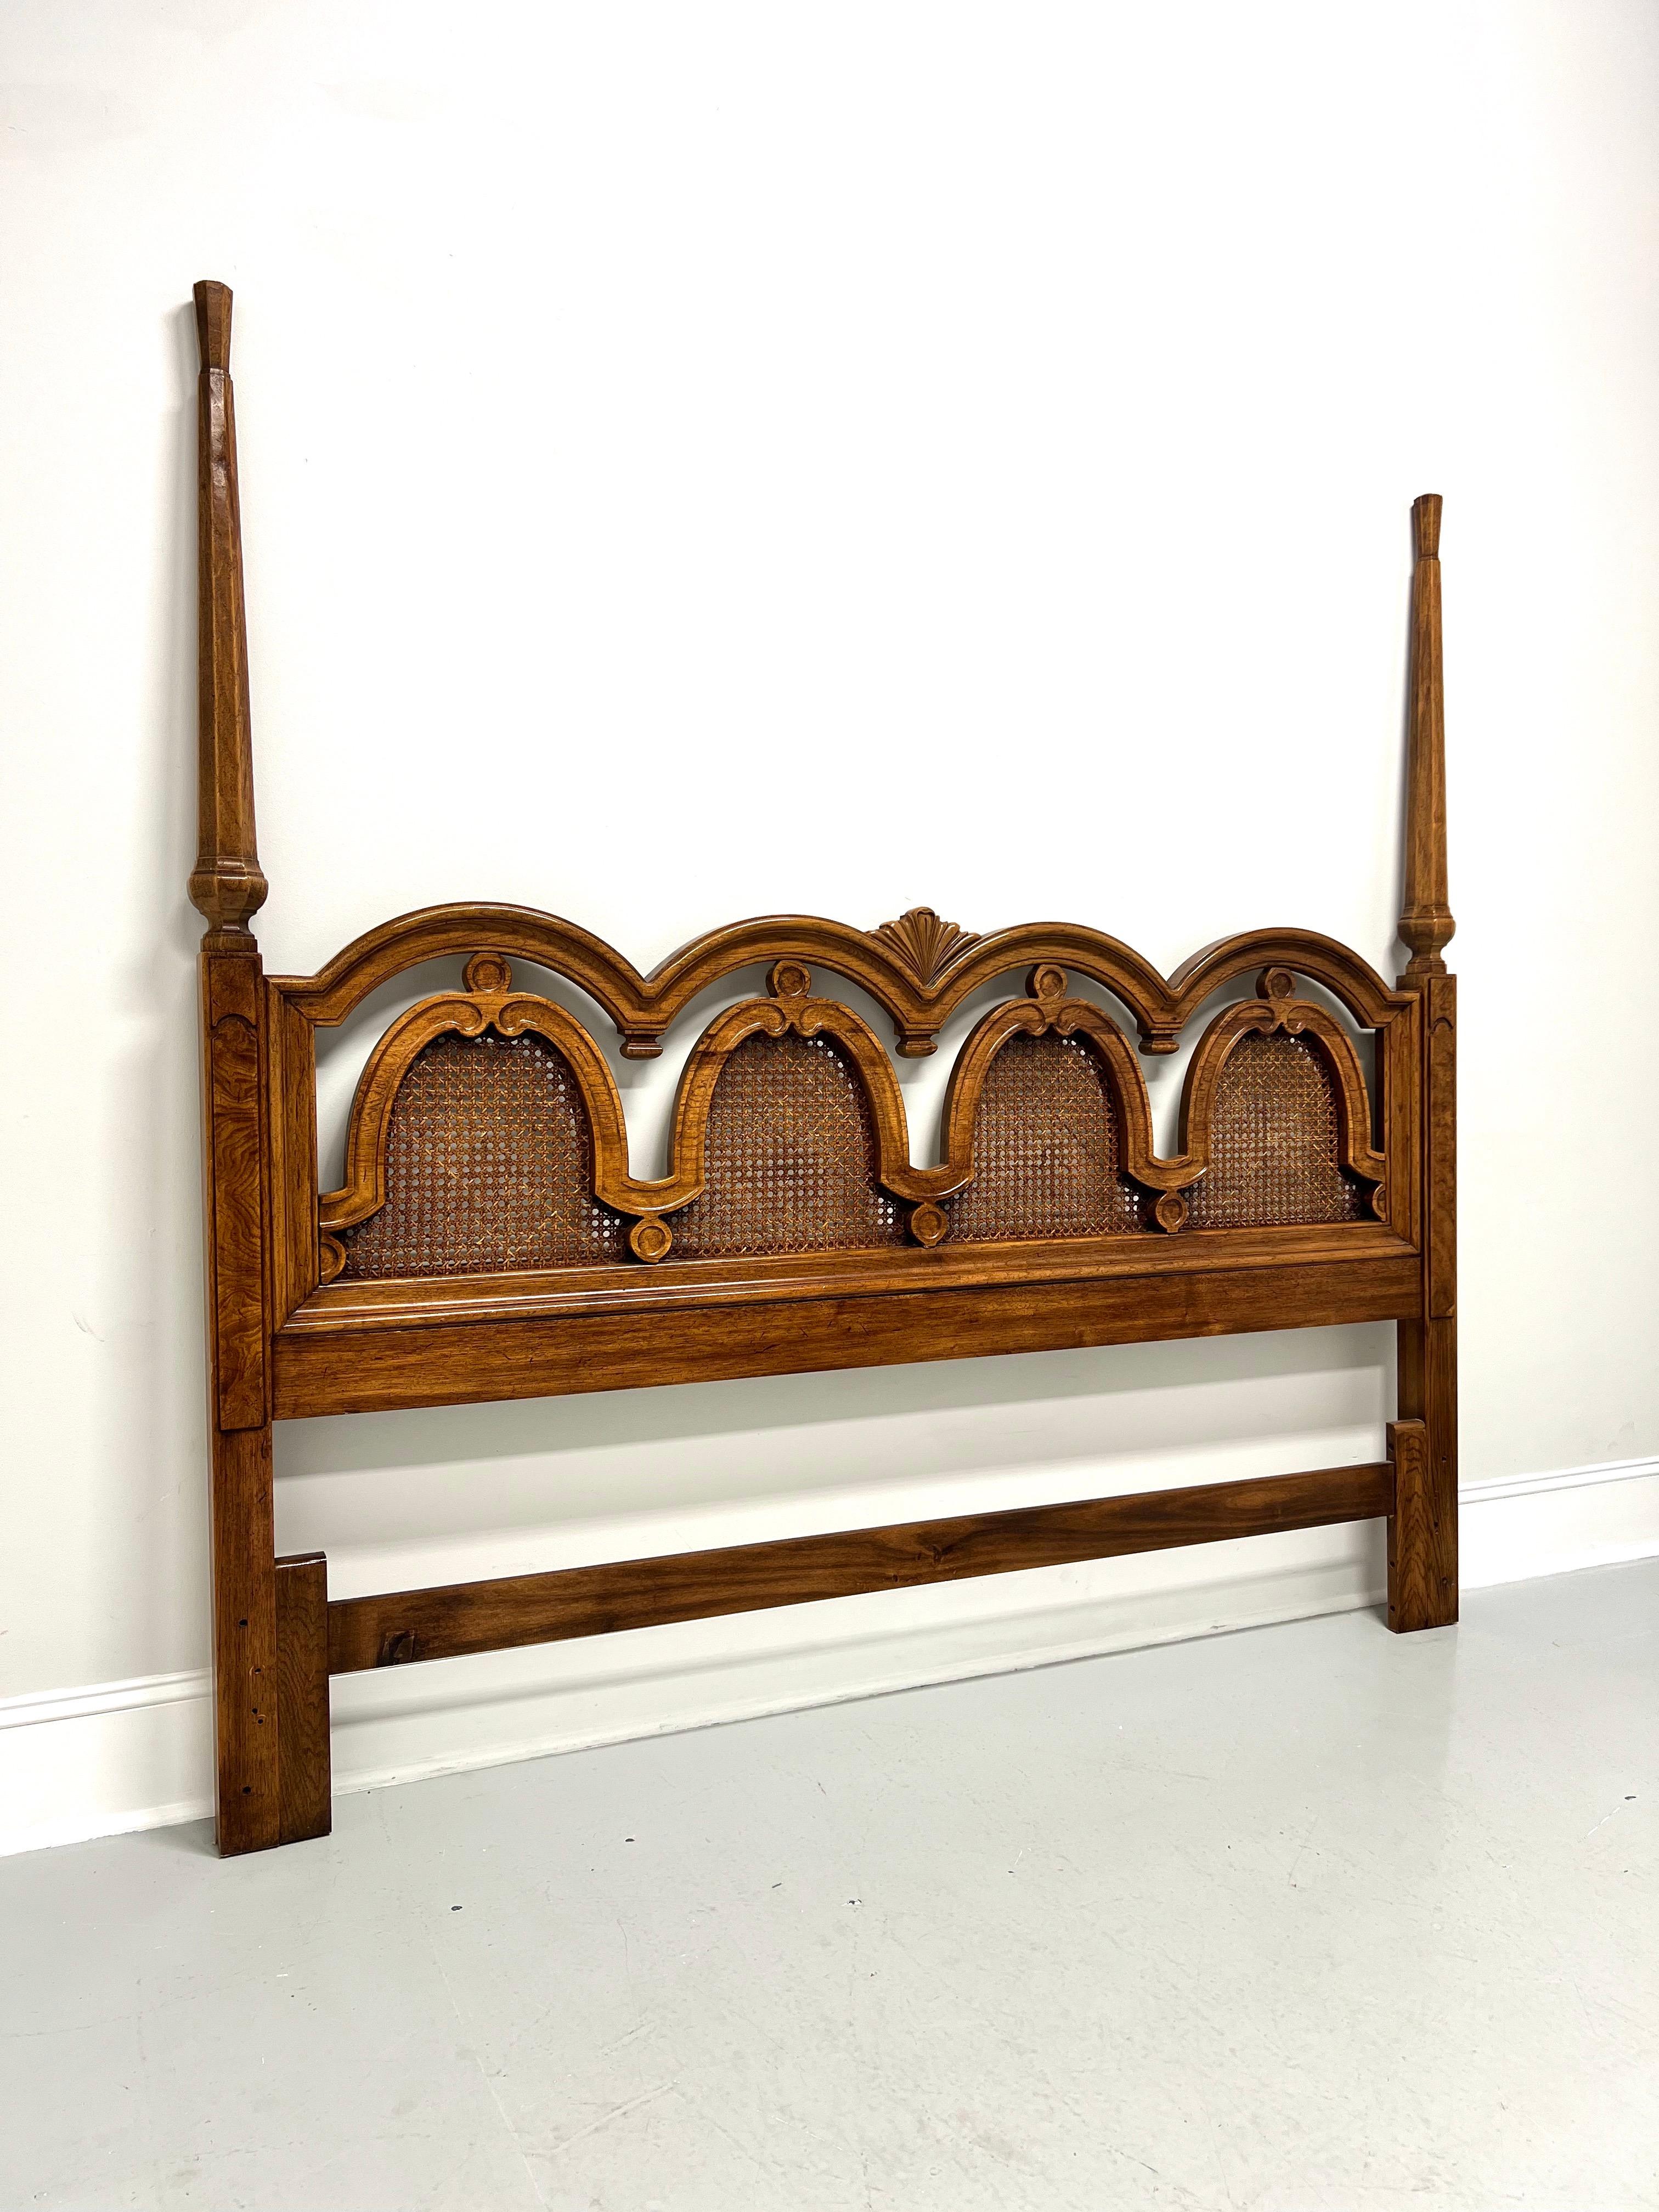 A Mediterranean style king size headboard by Drexel. Solid burl oak, arched design, two tall posts, and four inset caned panels on a solid base. Features decorative carved arches and accents. Made in North Carolina, USA, circa 1970's.

Style #: 